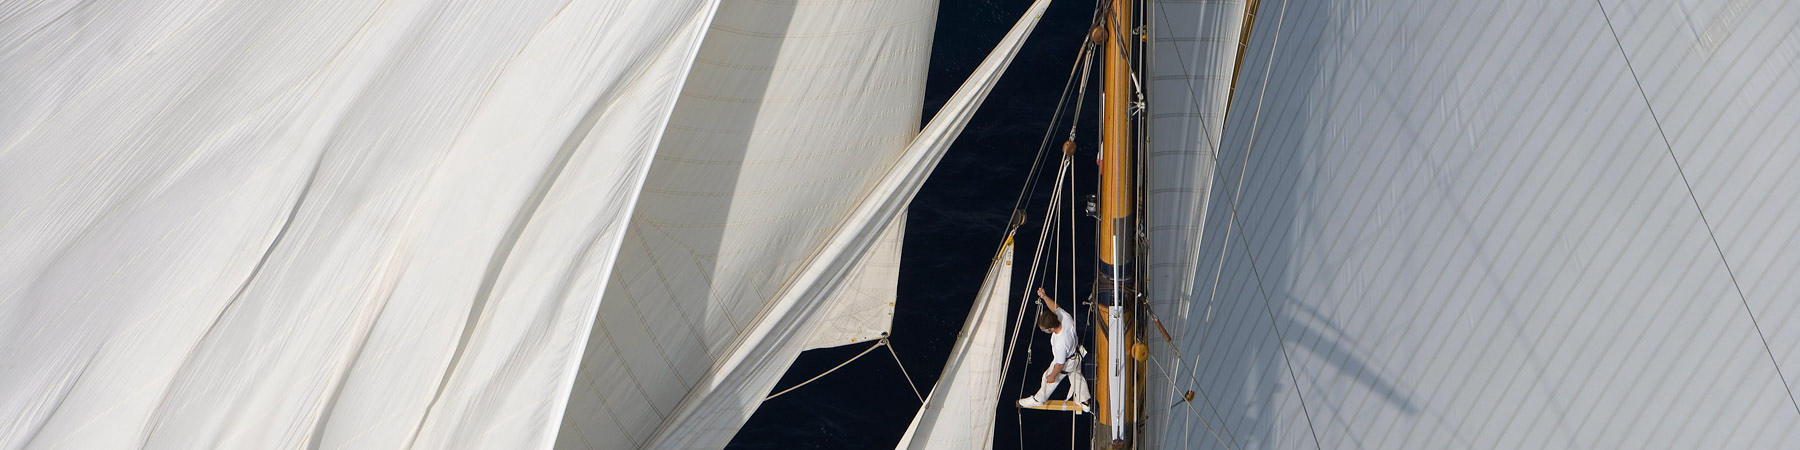 Classic Yachting - Photo Pêcheur d'Images